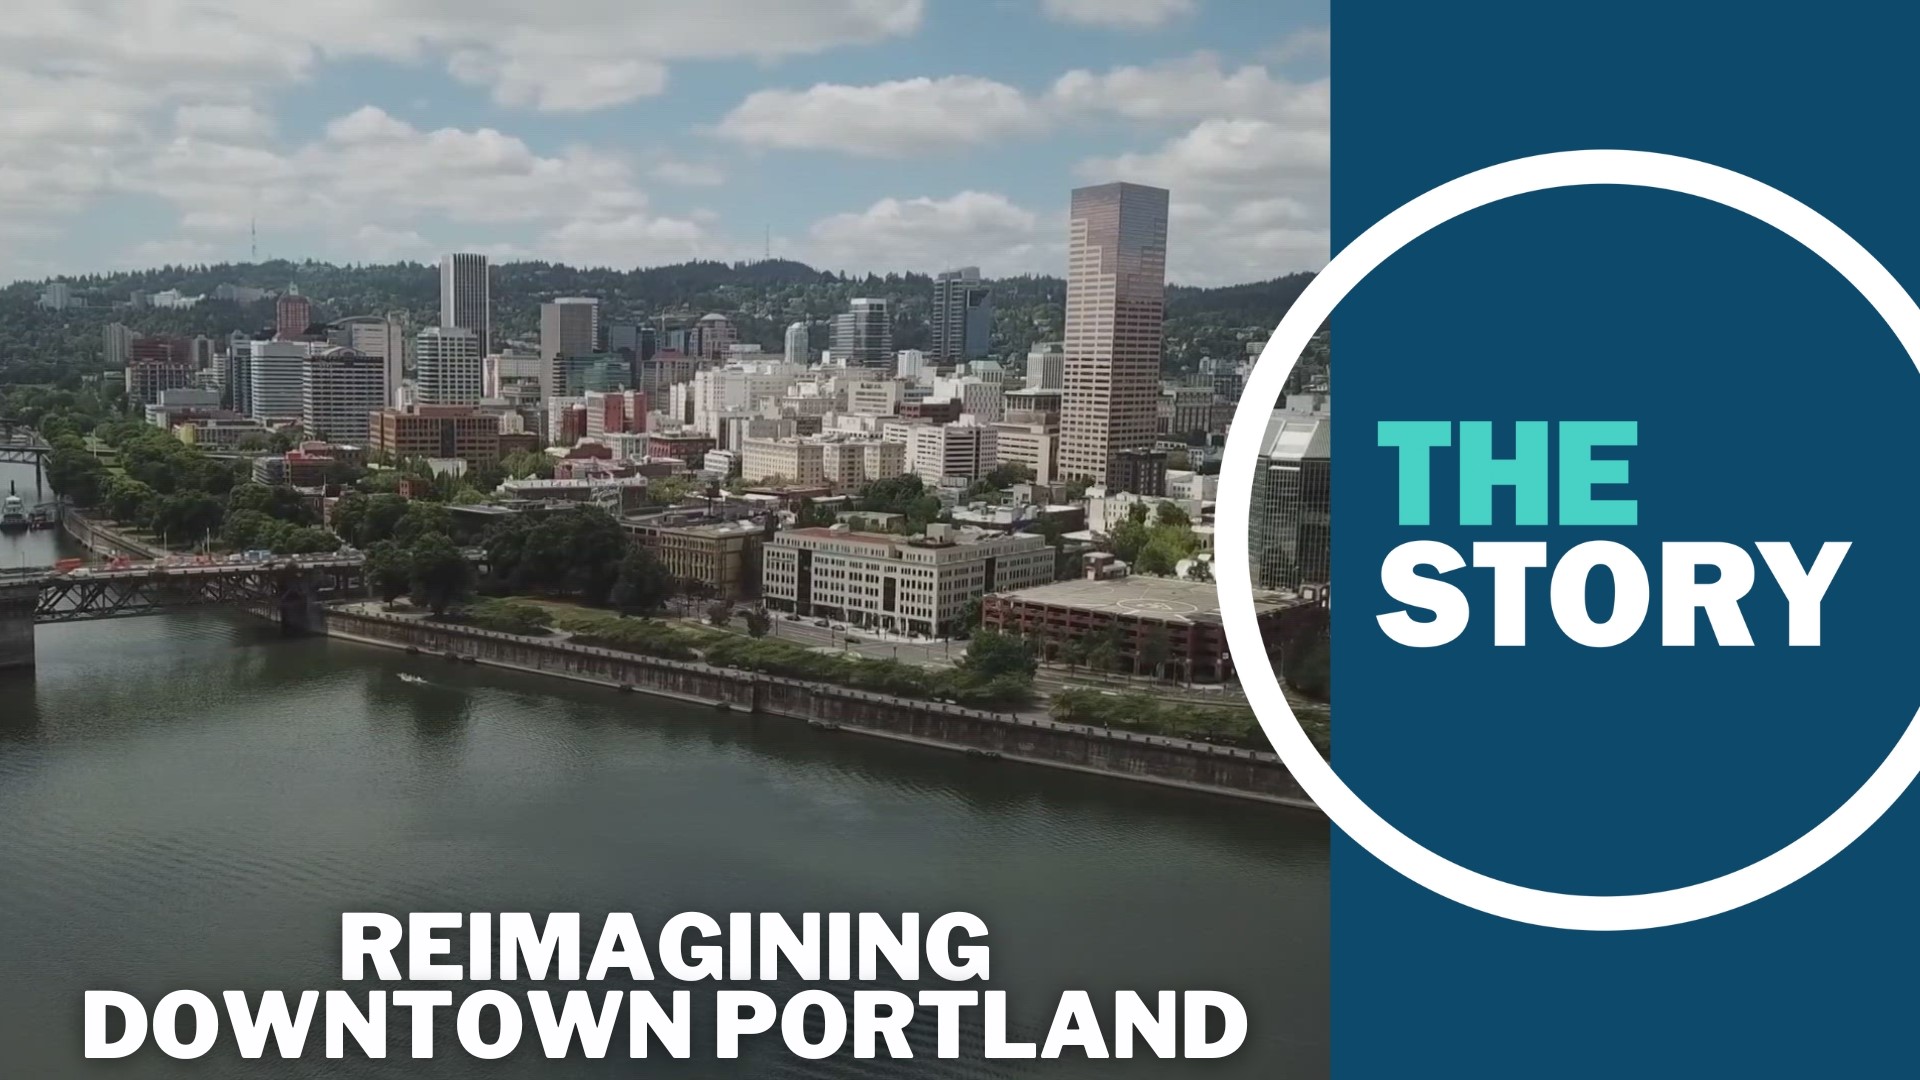 With development slow and office vacancies still through the roof, Portland business leaders say the city needs to stop trying to make a comeback and adapt.